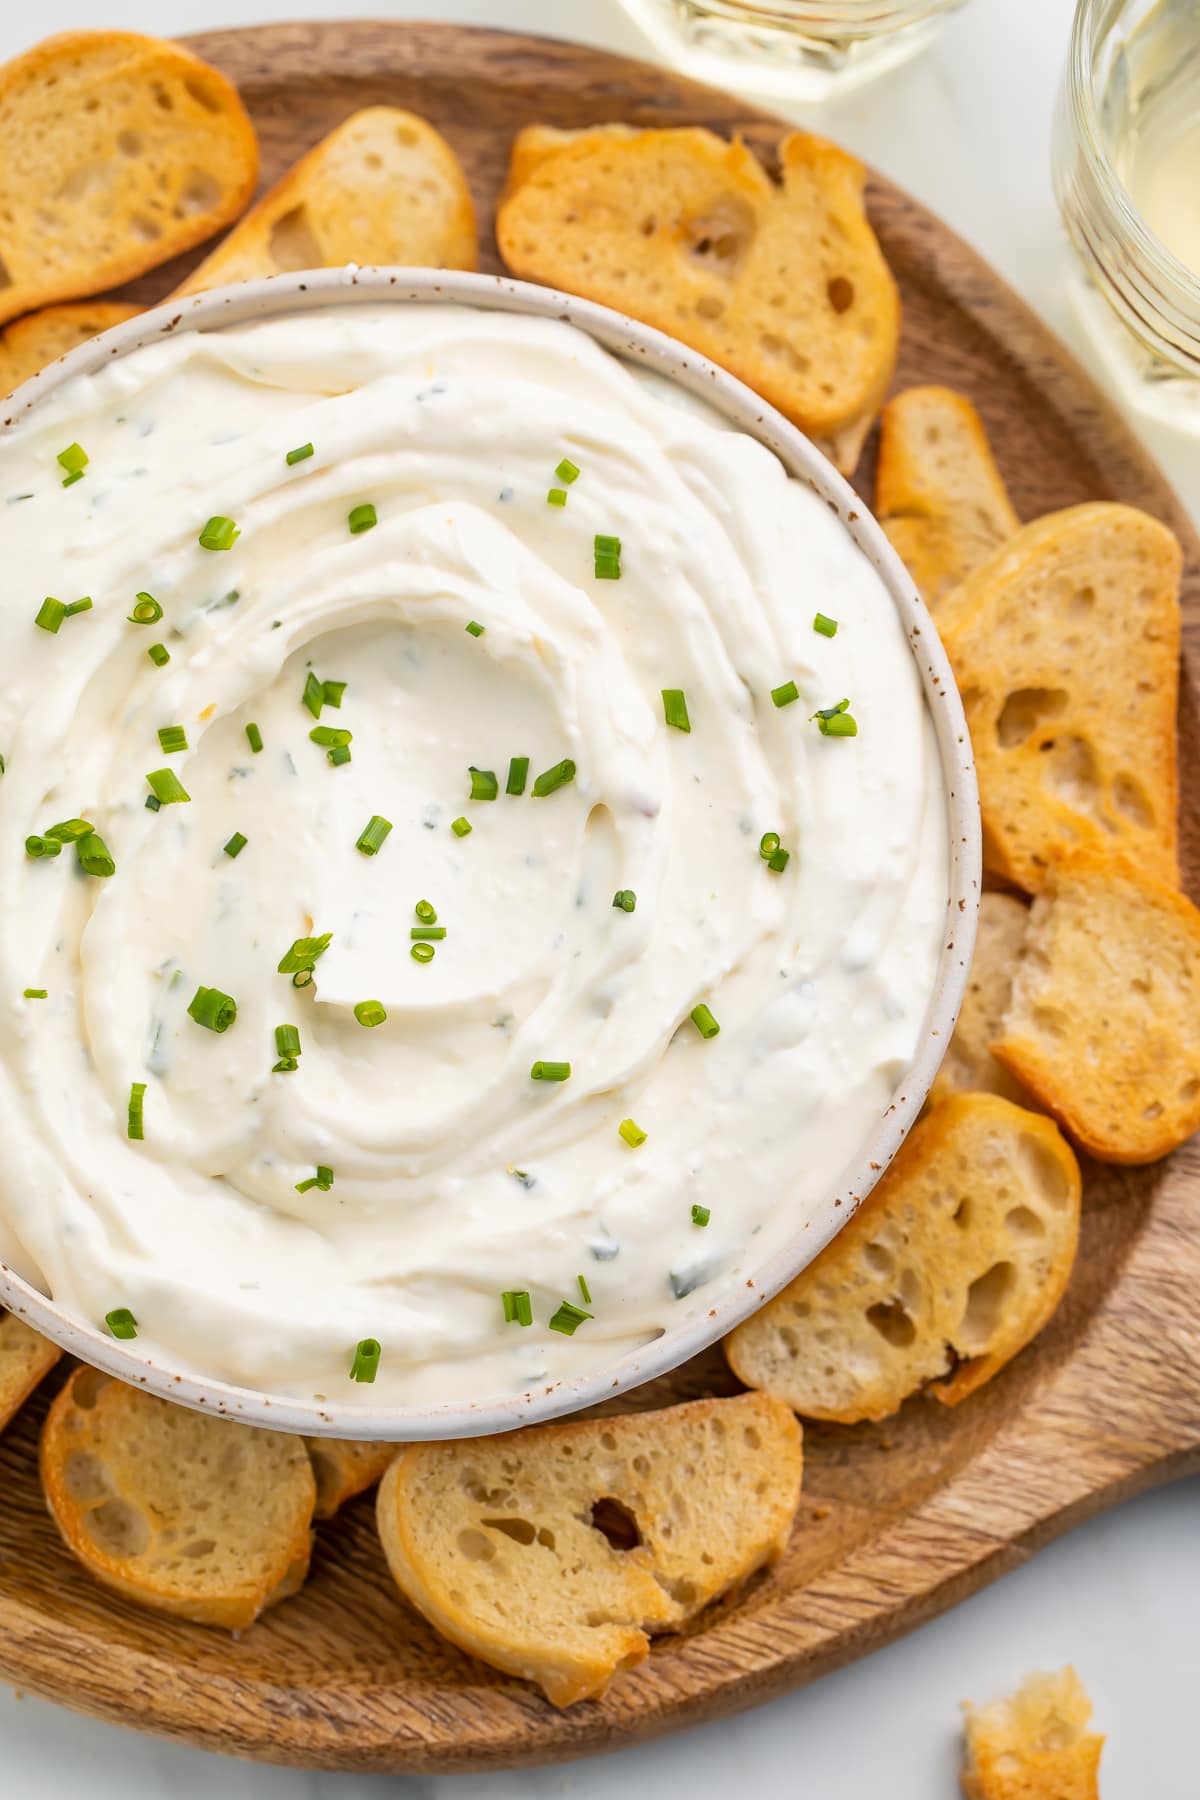 Creamy boursin dip in a bowl surrounded by crostini on a neutral platter.